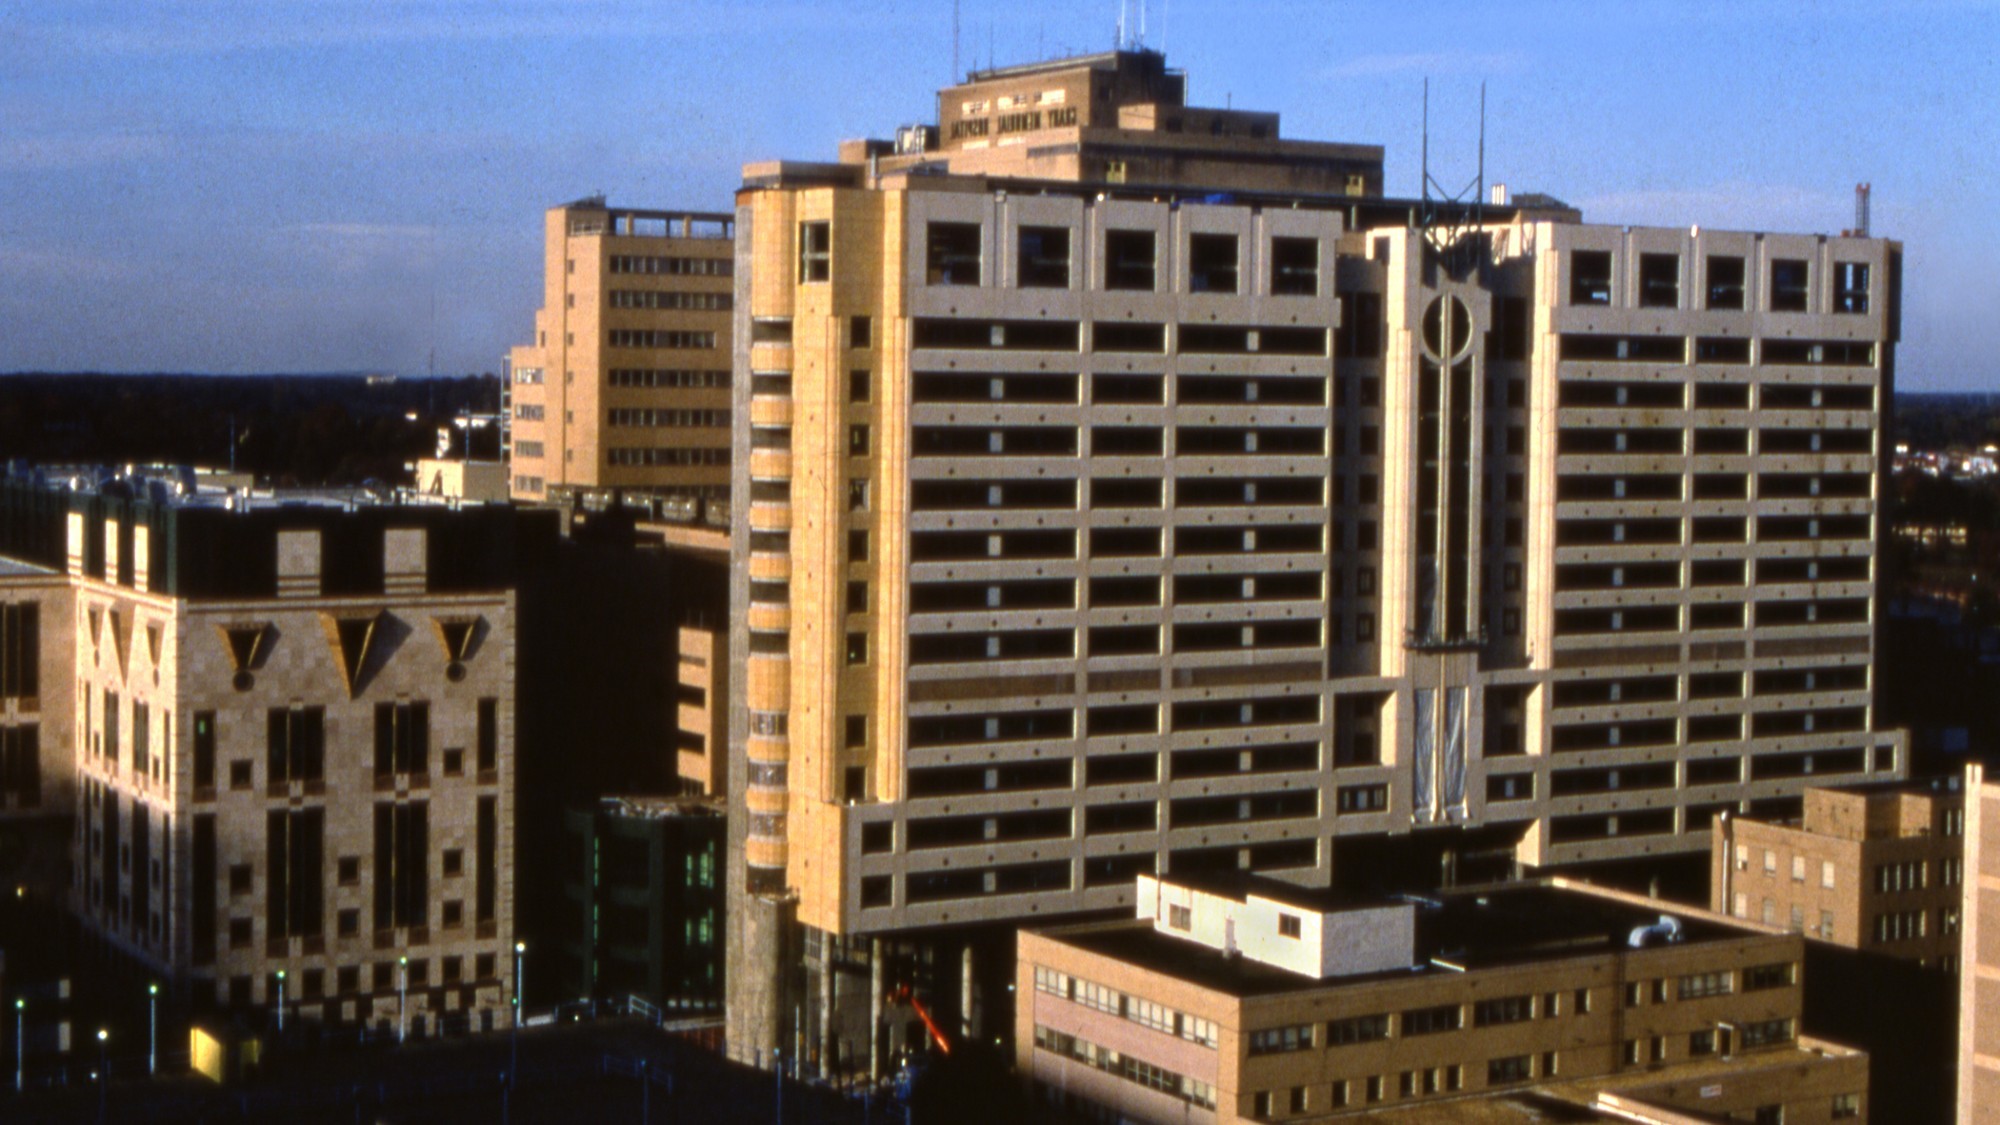 The exterior of the Grady Building from a high angle